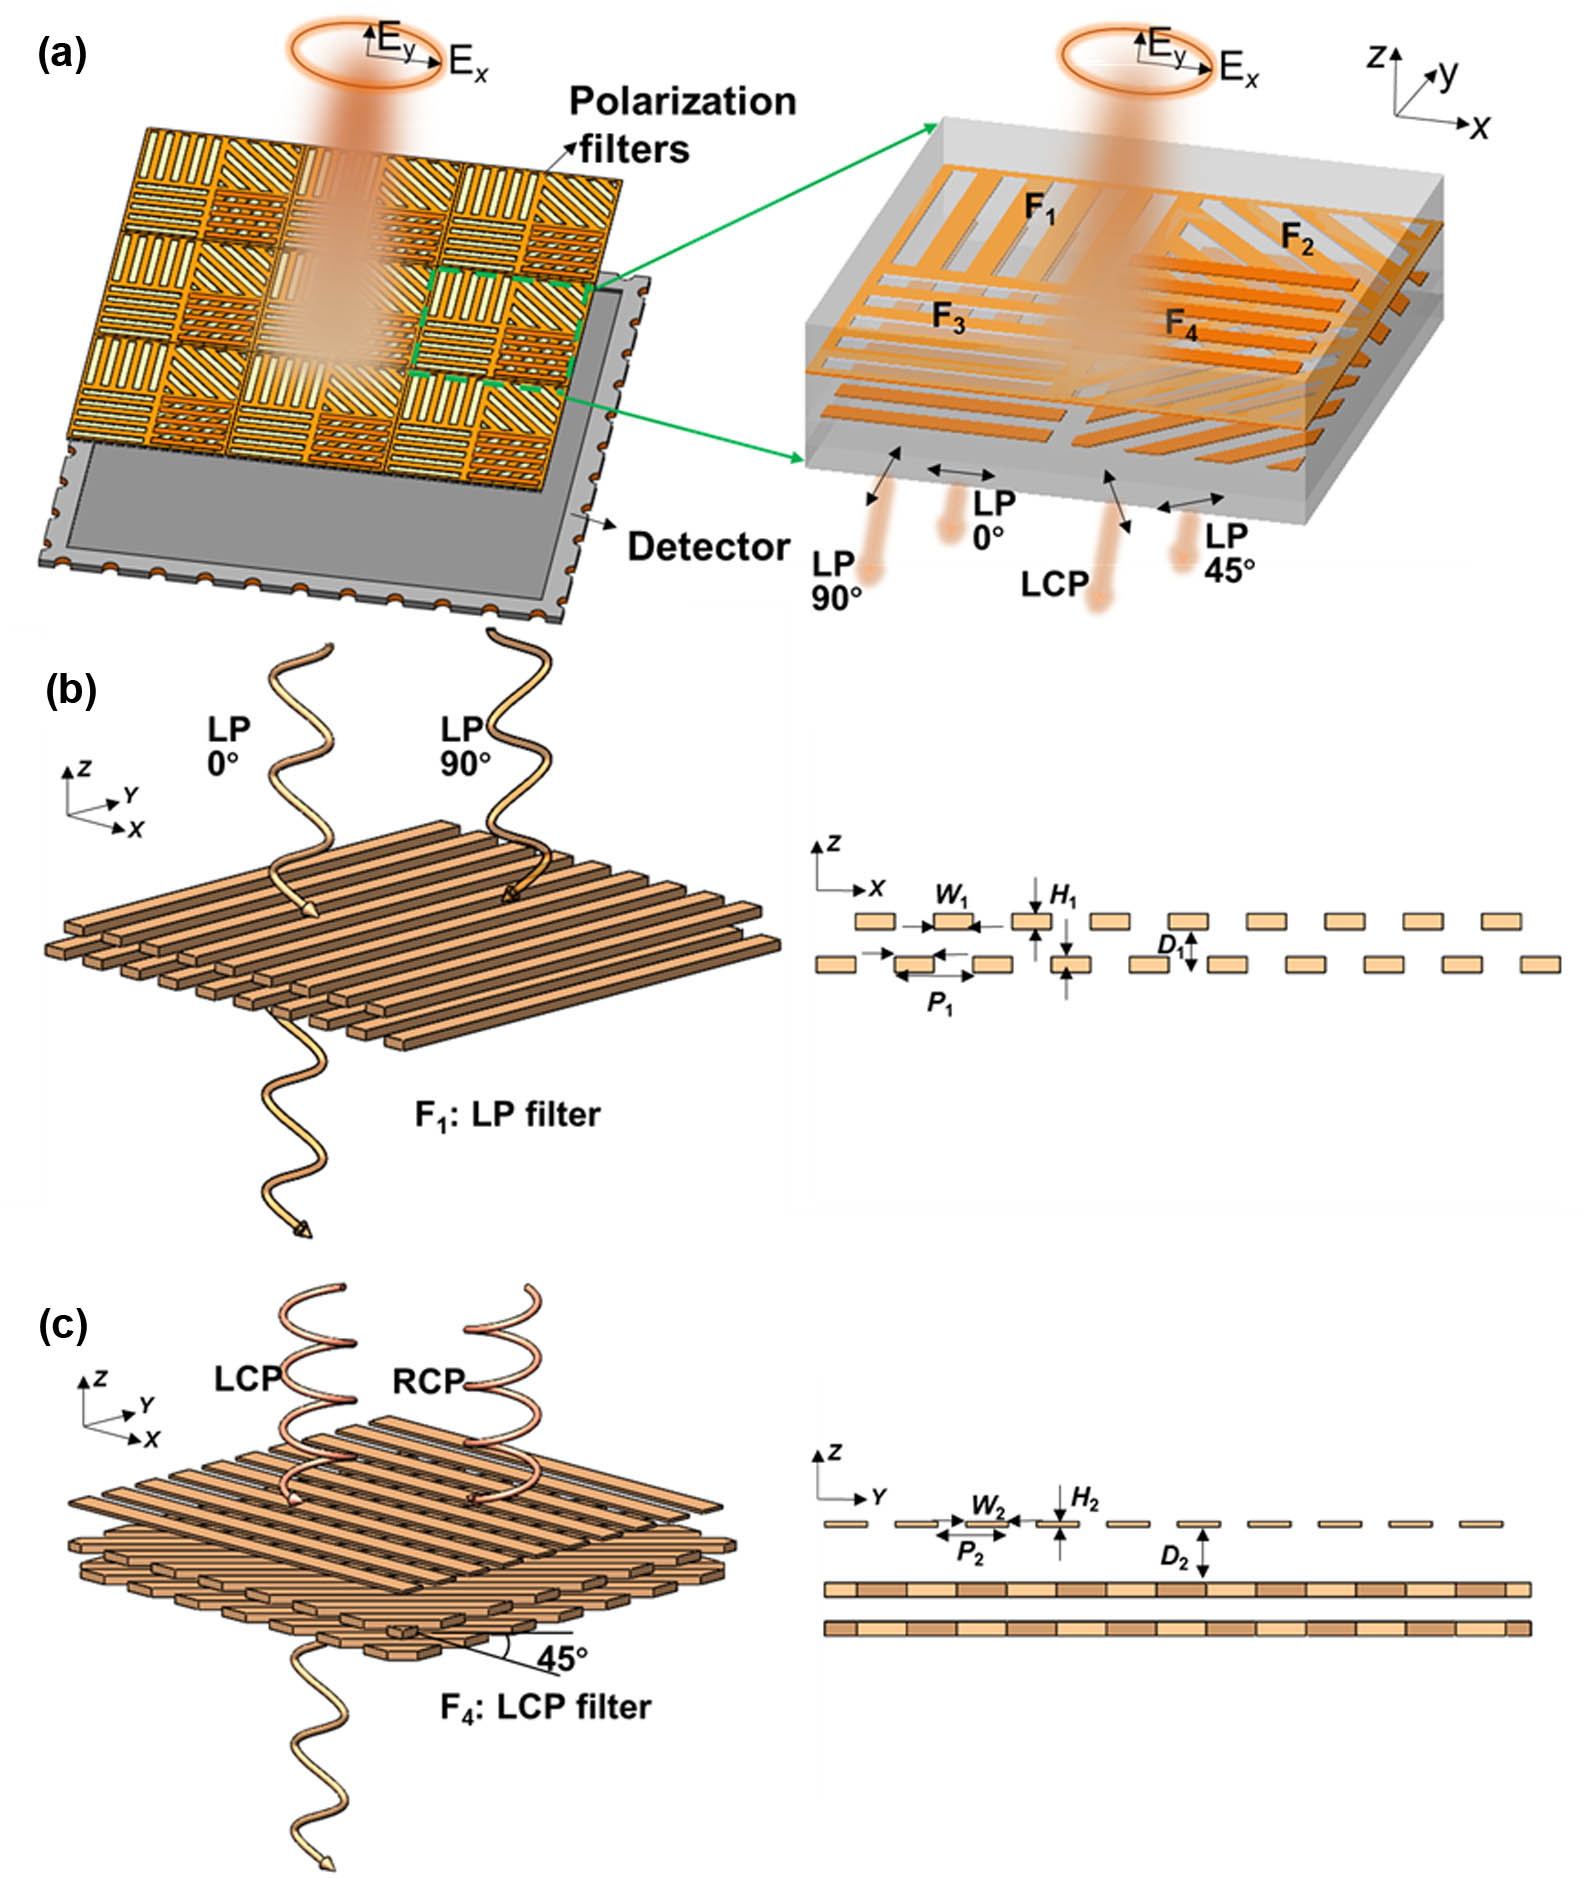 Large-area ultracompact pixelated aluminium wire-grid-based metamaterials for full-Stokes polarization imaging. (a) Schematic of the device design for Stokes parameters measurement. F1−F3 microcells are linear polarization filters to filter linearly polarized light with the electric field vector oriented at different angles with respect to the x axis, i.e., 0°, 45°, and 90°. F4 microcell is left circular polarization filter to transmit left circular polarization light. (b) Schematic of the linear polarization filters consisting of the double-layer wire-grid. The period, wire width, height, and spacing are P1, W1, H1, and D1, respectively. (c) Schematic of the left circular polarization filter consisting of a top circular–linear polarization converter and an underneath linear polarization filter. The period, wire width, height of the circular–linear polarization converter, and spacing between the circular–linear polarization converter and the linear polarization filter are P2, W3, H2, and D2, respectively.